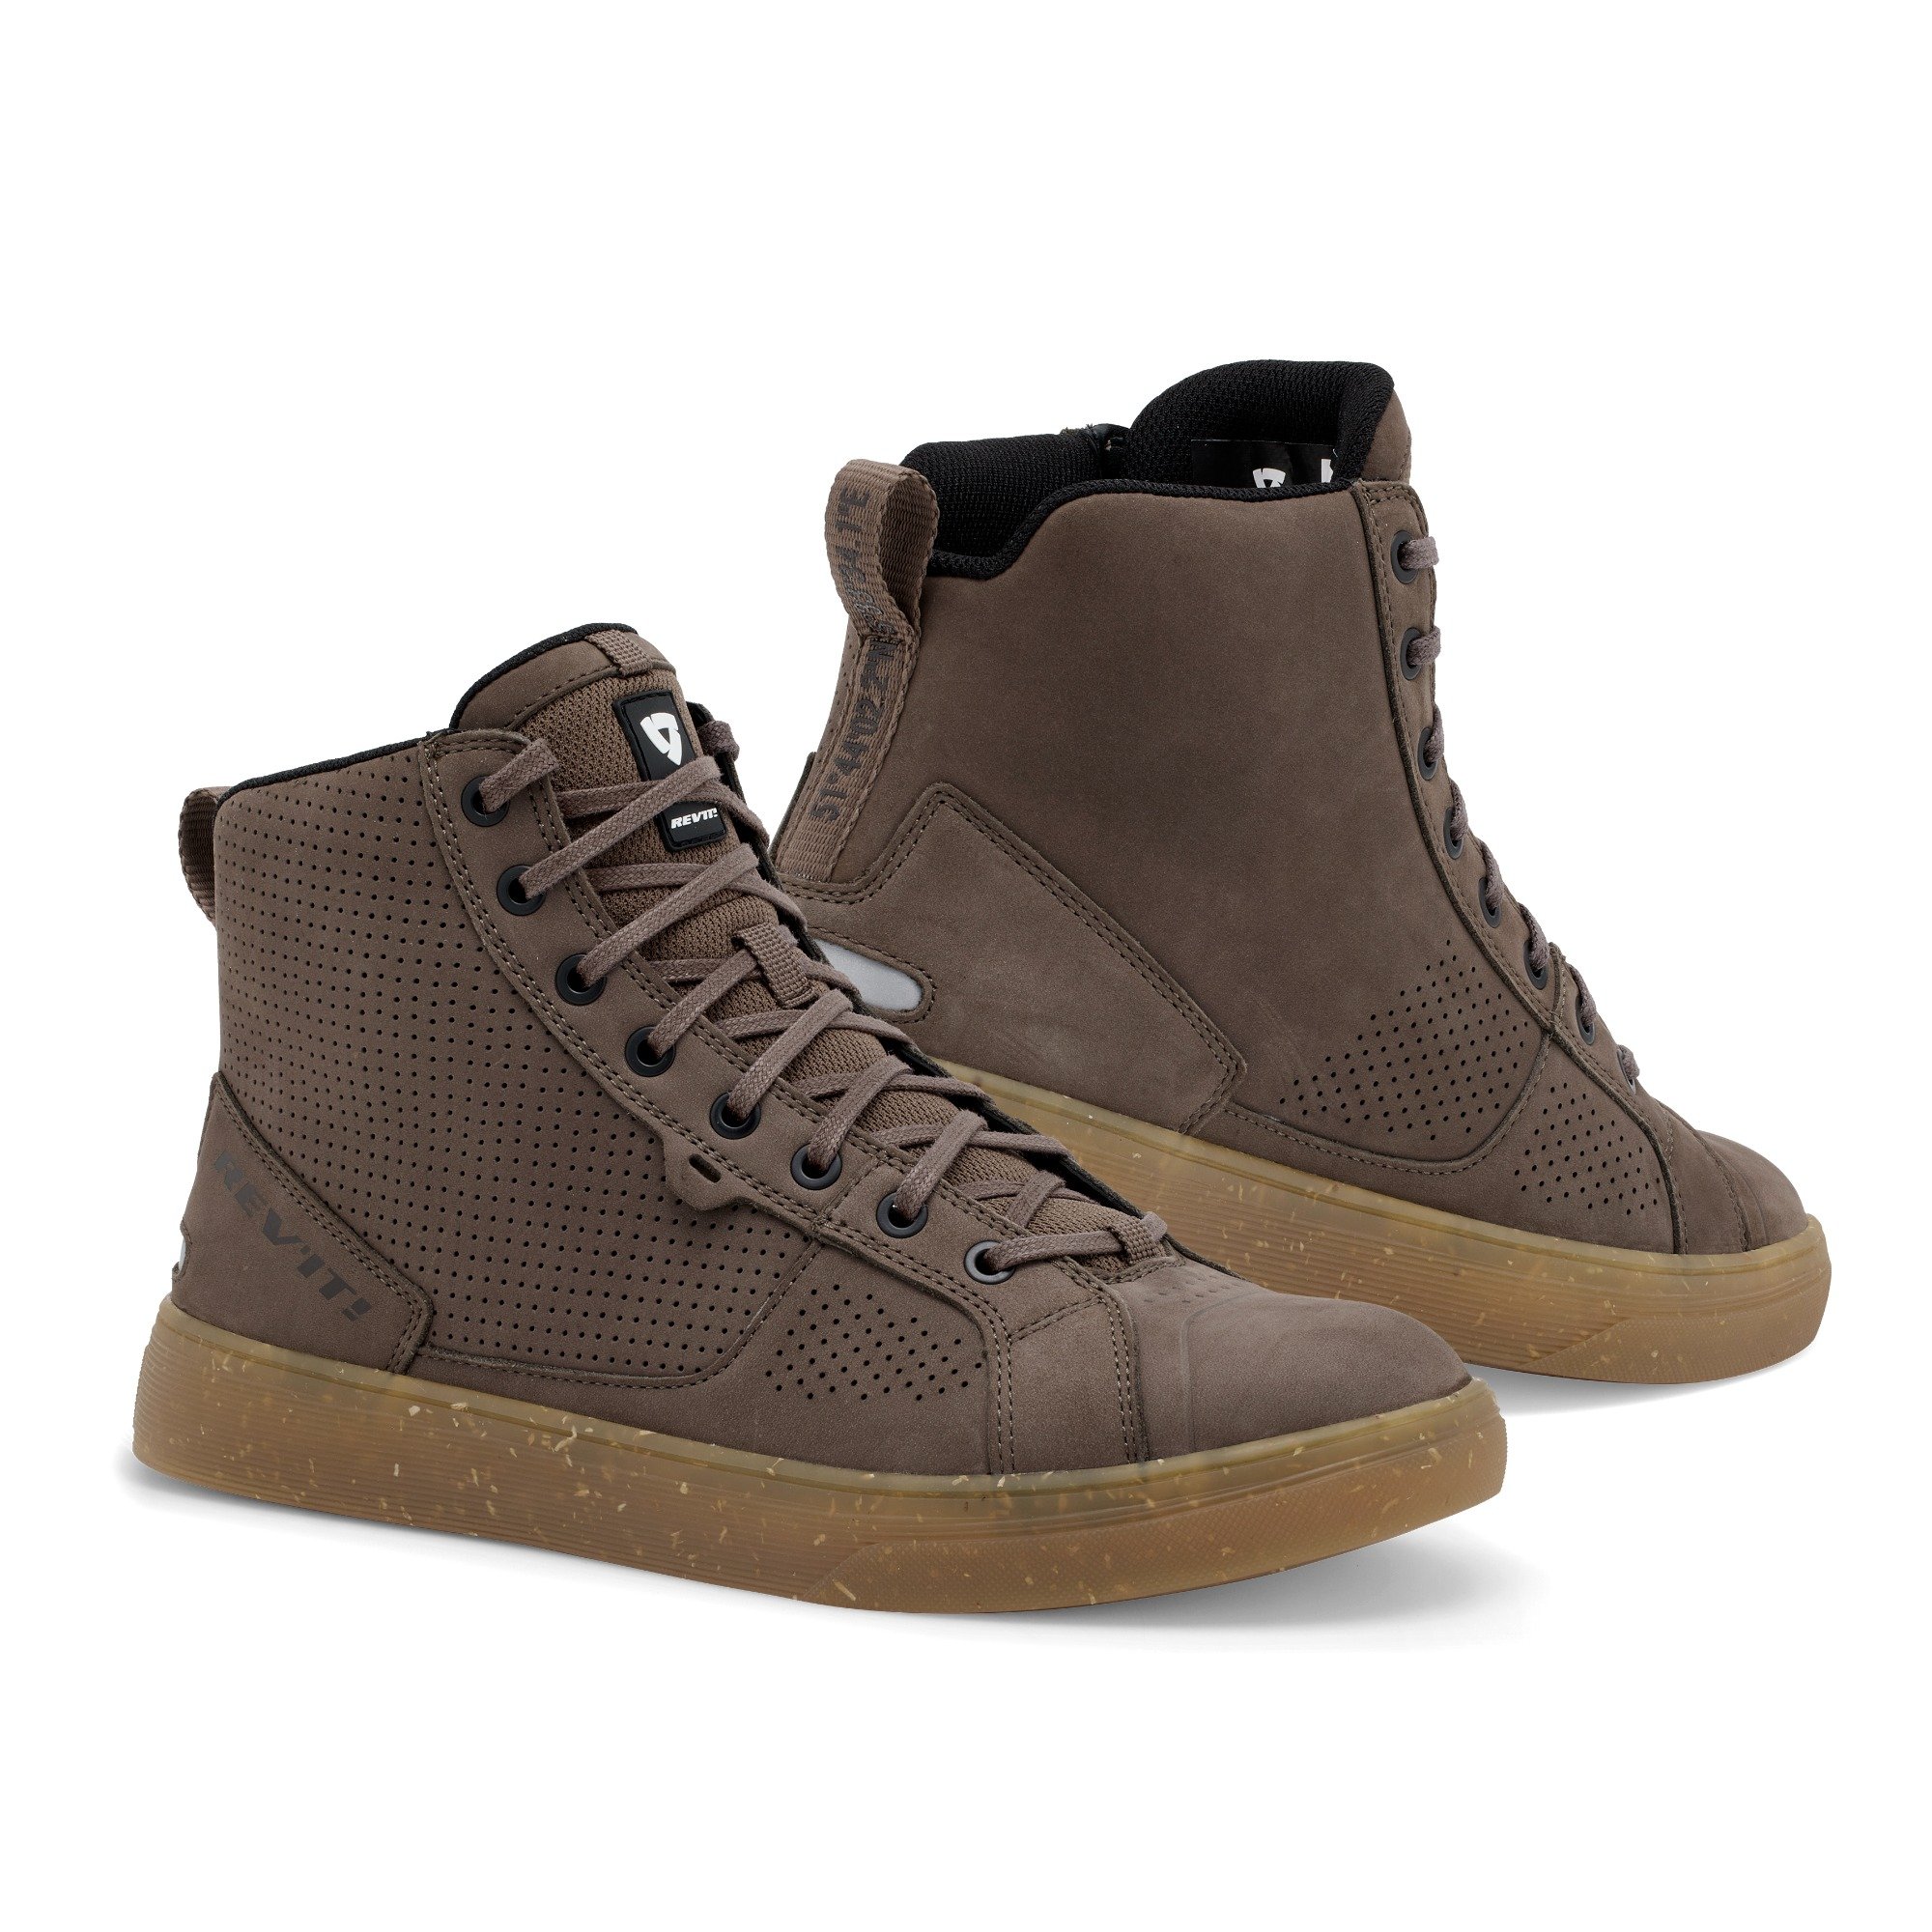 Image of REV'IT! Arrow Chaussures Taupe Marron Taille 42